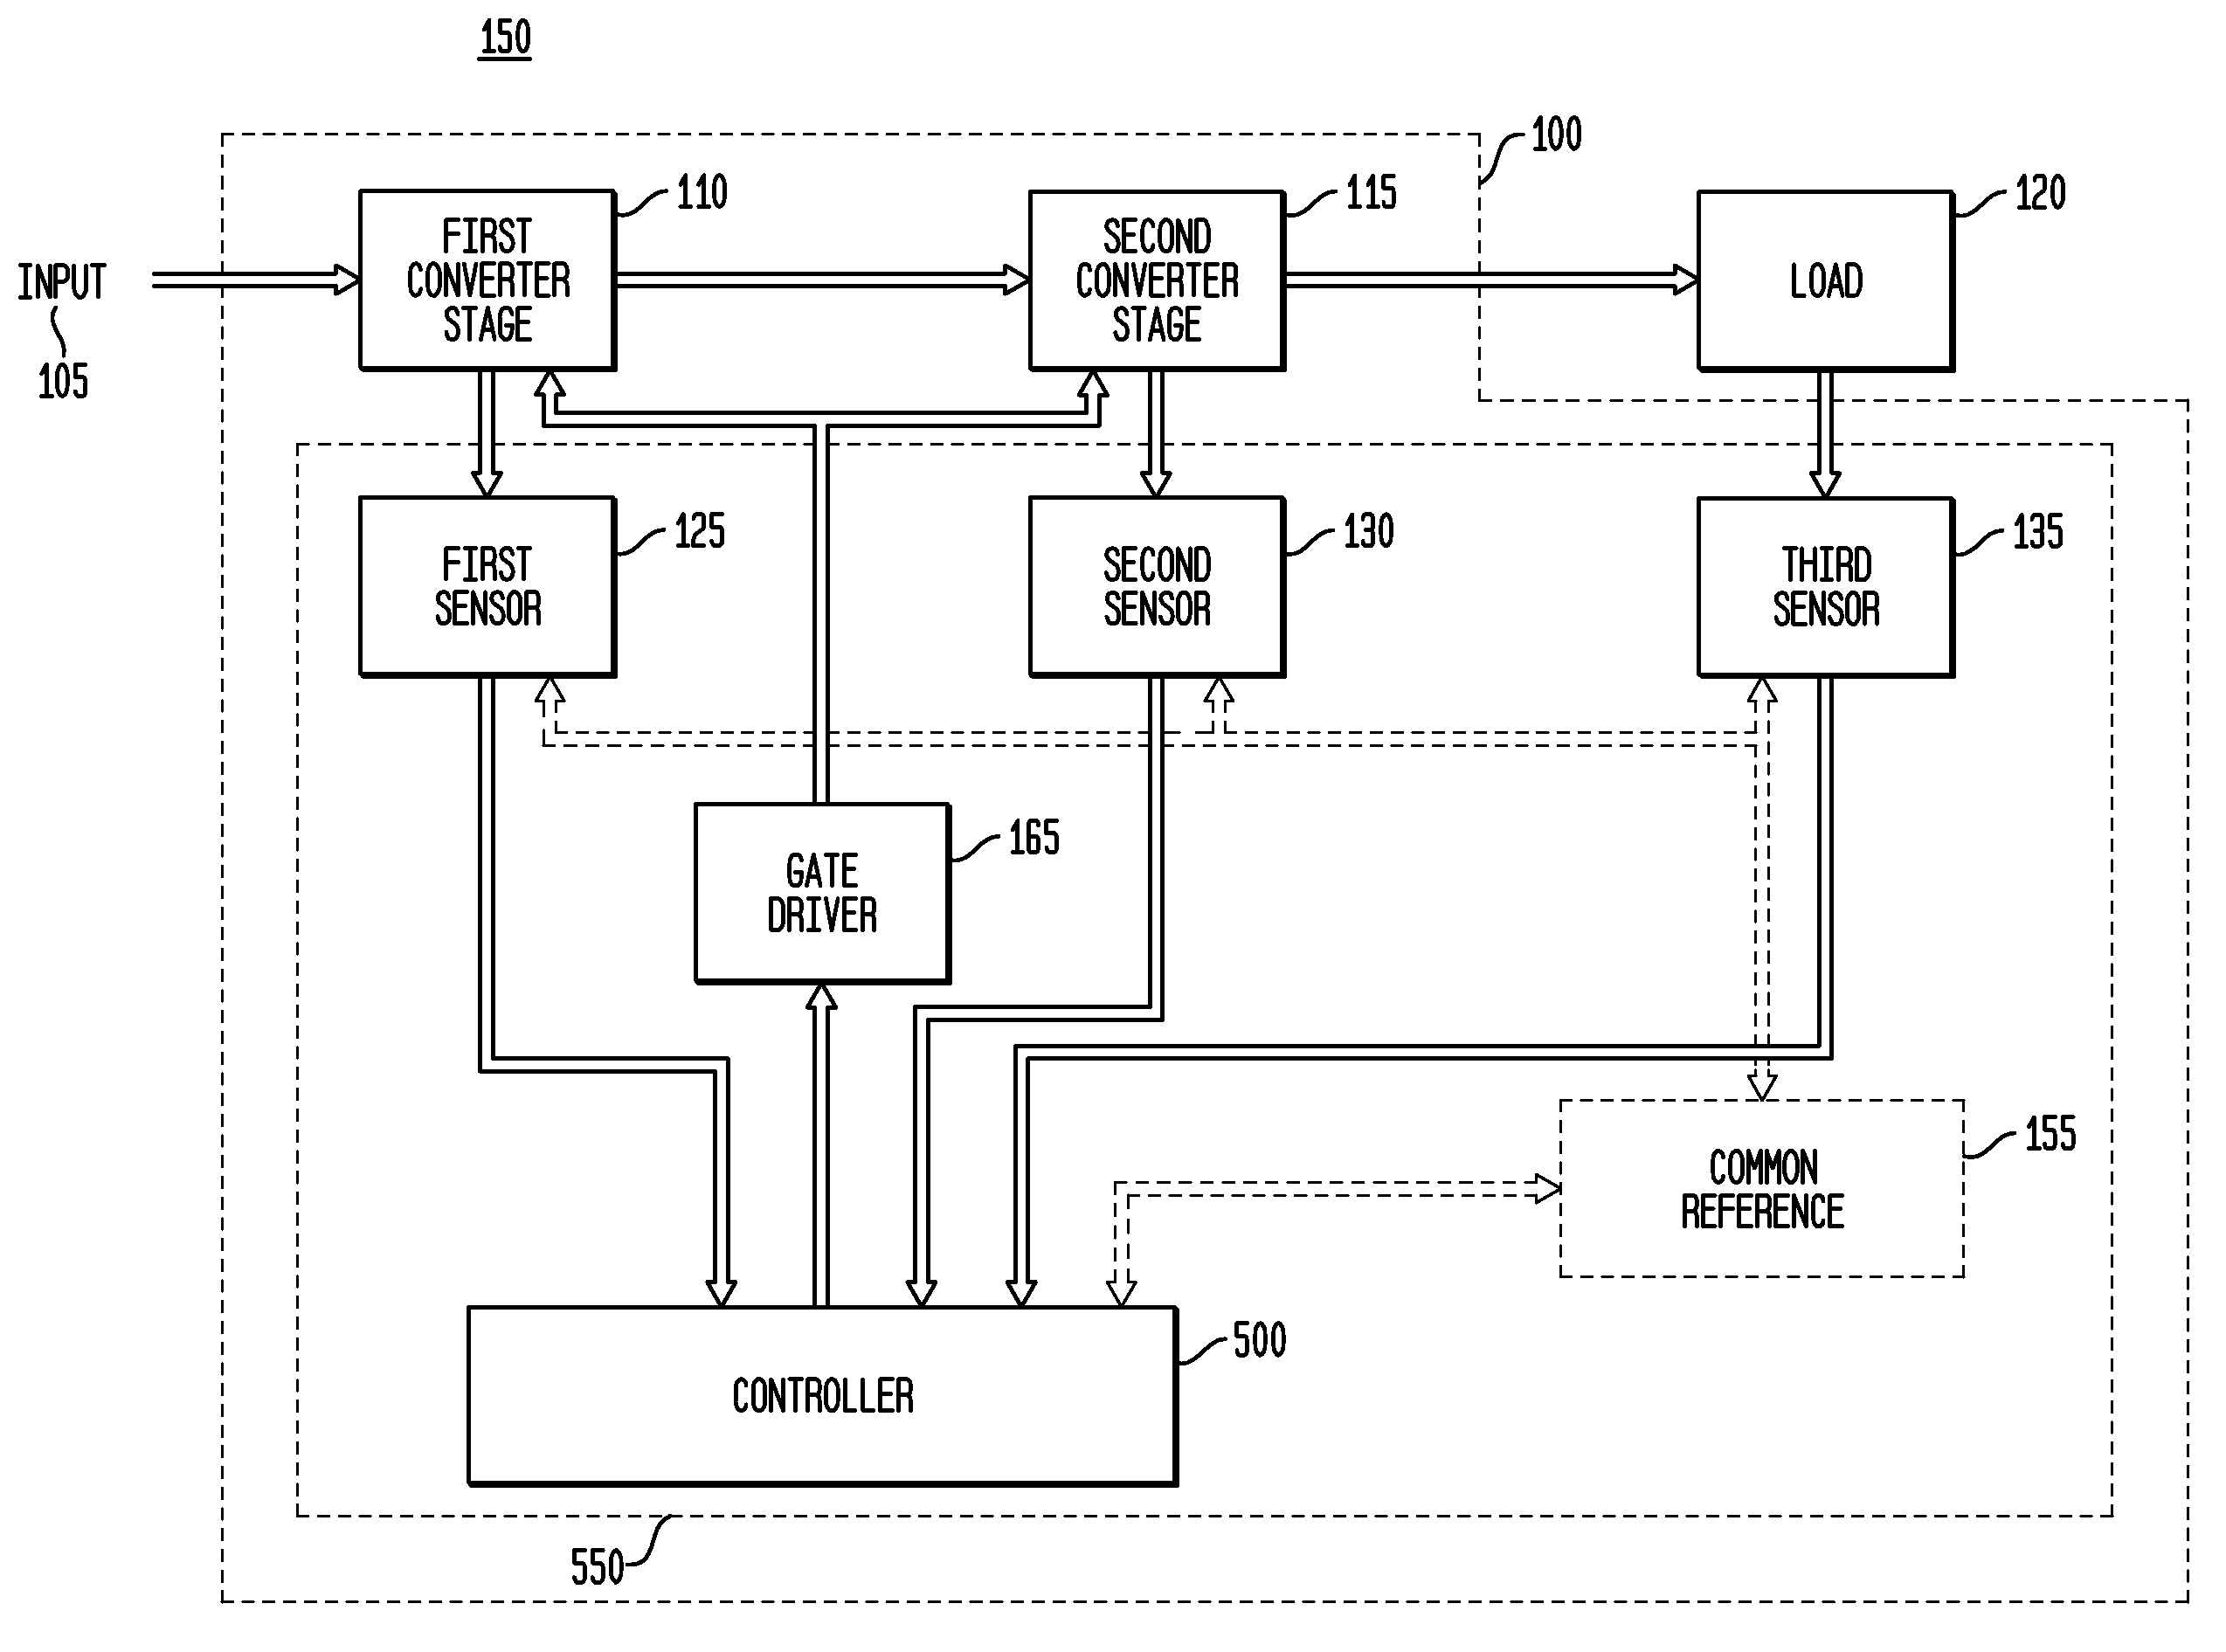 Apparatus, system and method for cascaded power conversion